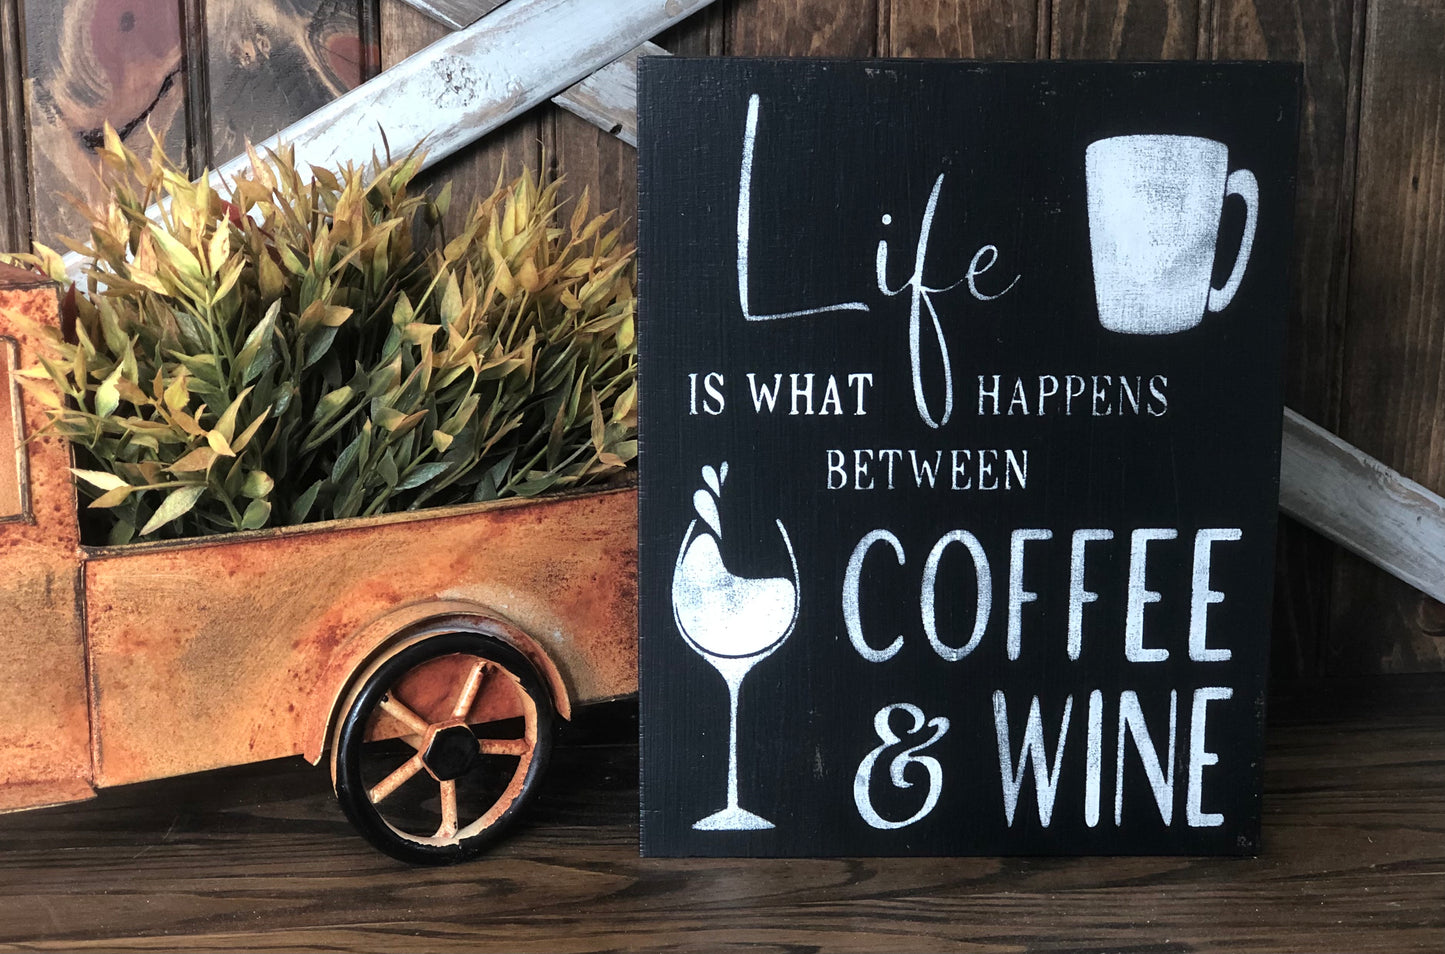 Life Happens Between Coffee and Wine - Rustic Wood Sign